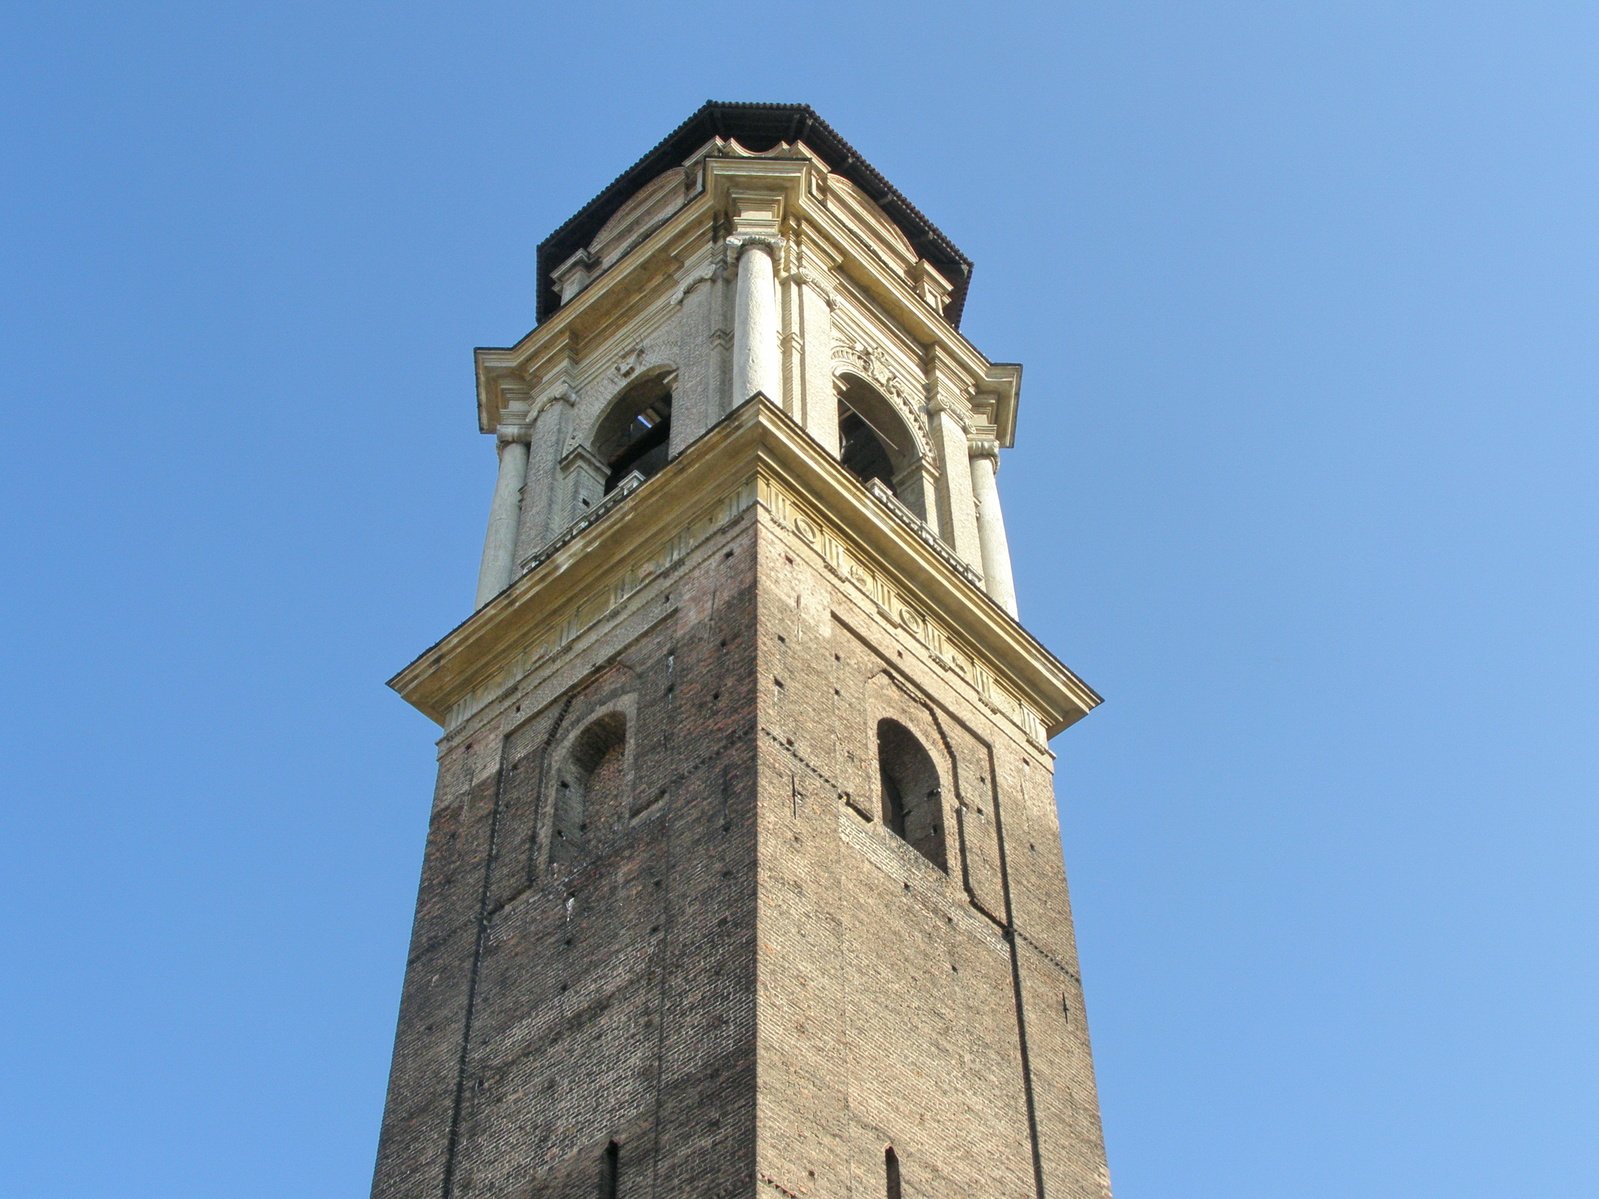 a tall tower in the sky with a small window